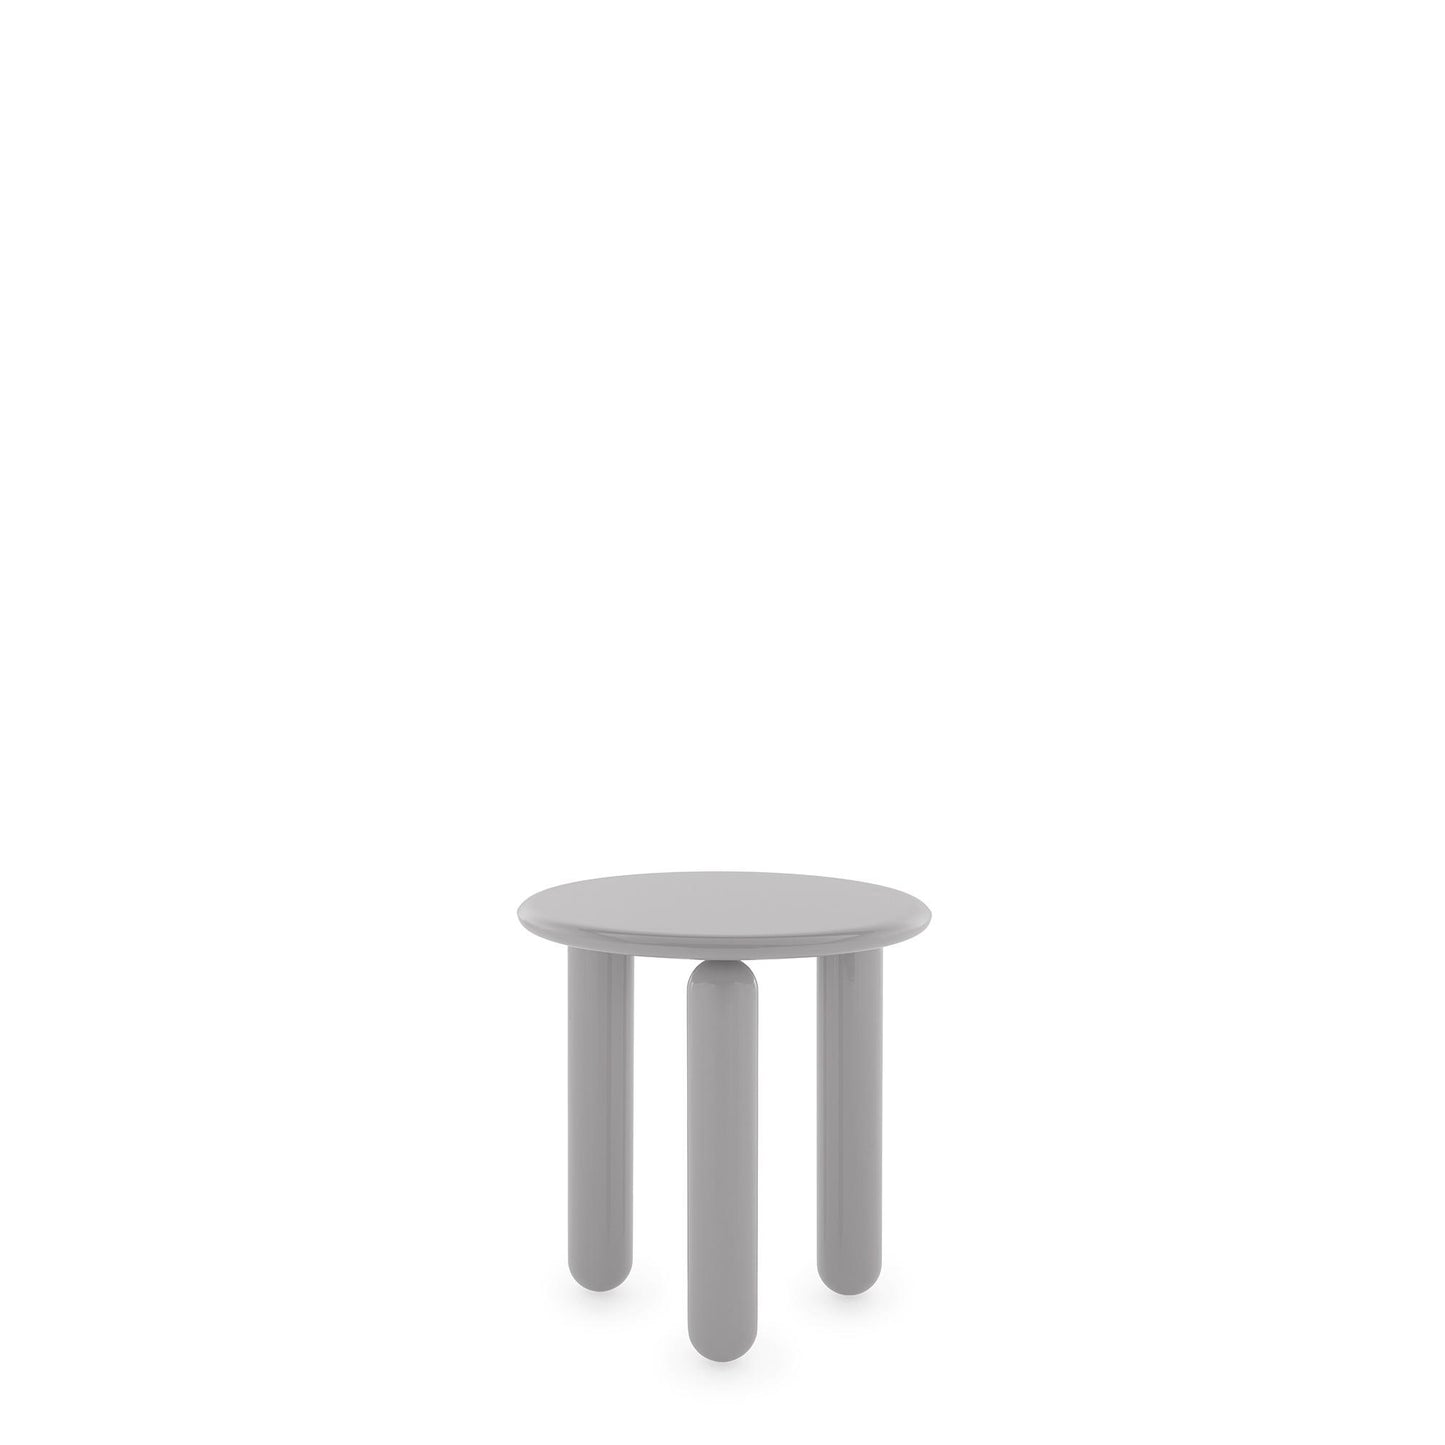 Undique Mas Side Table 48x51 by Kartell #Grey